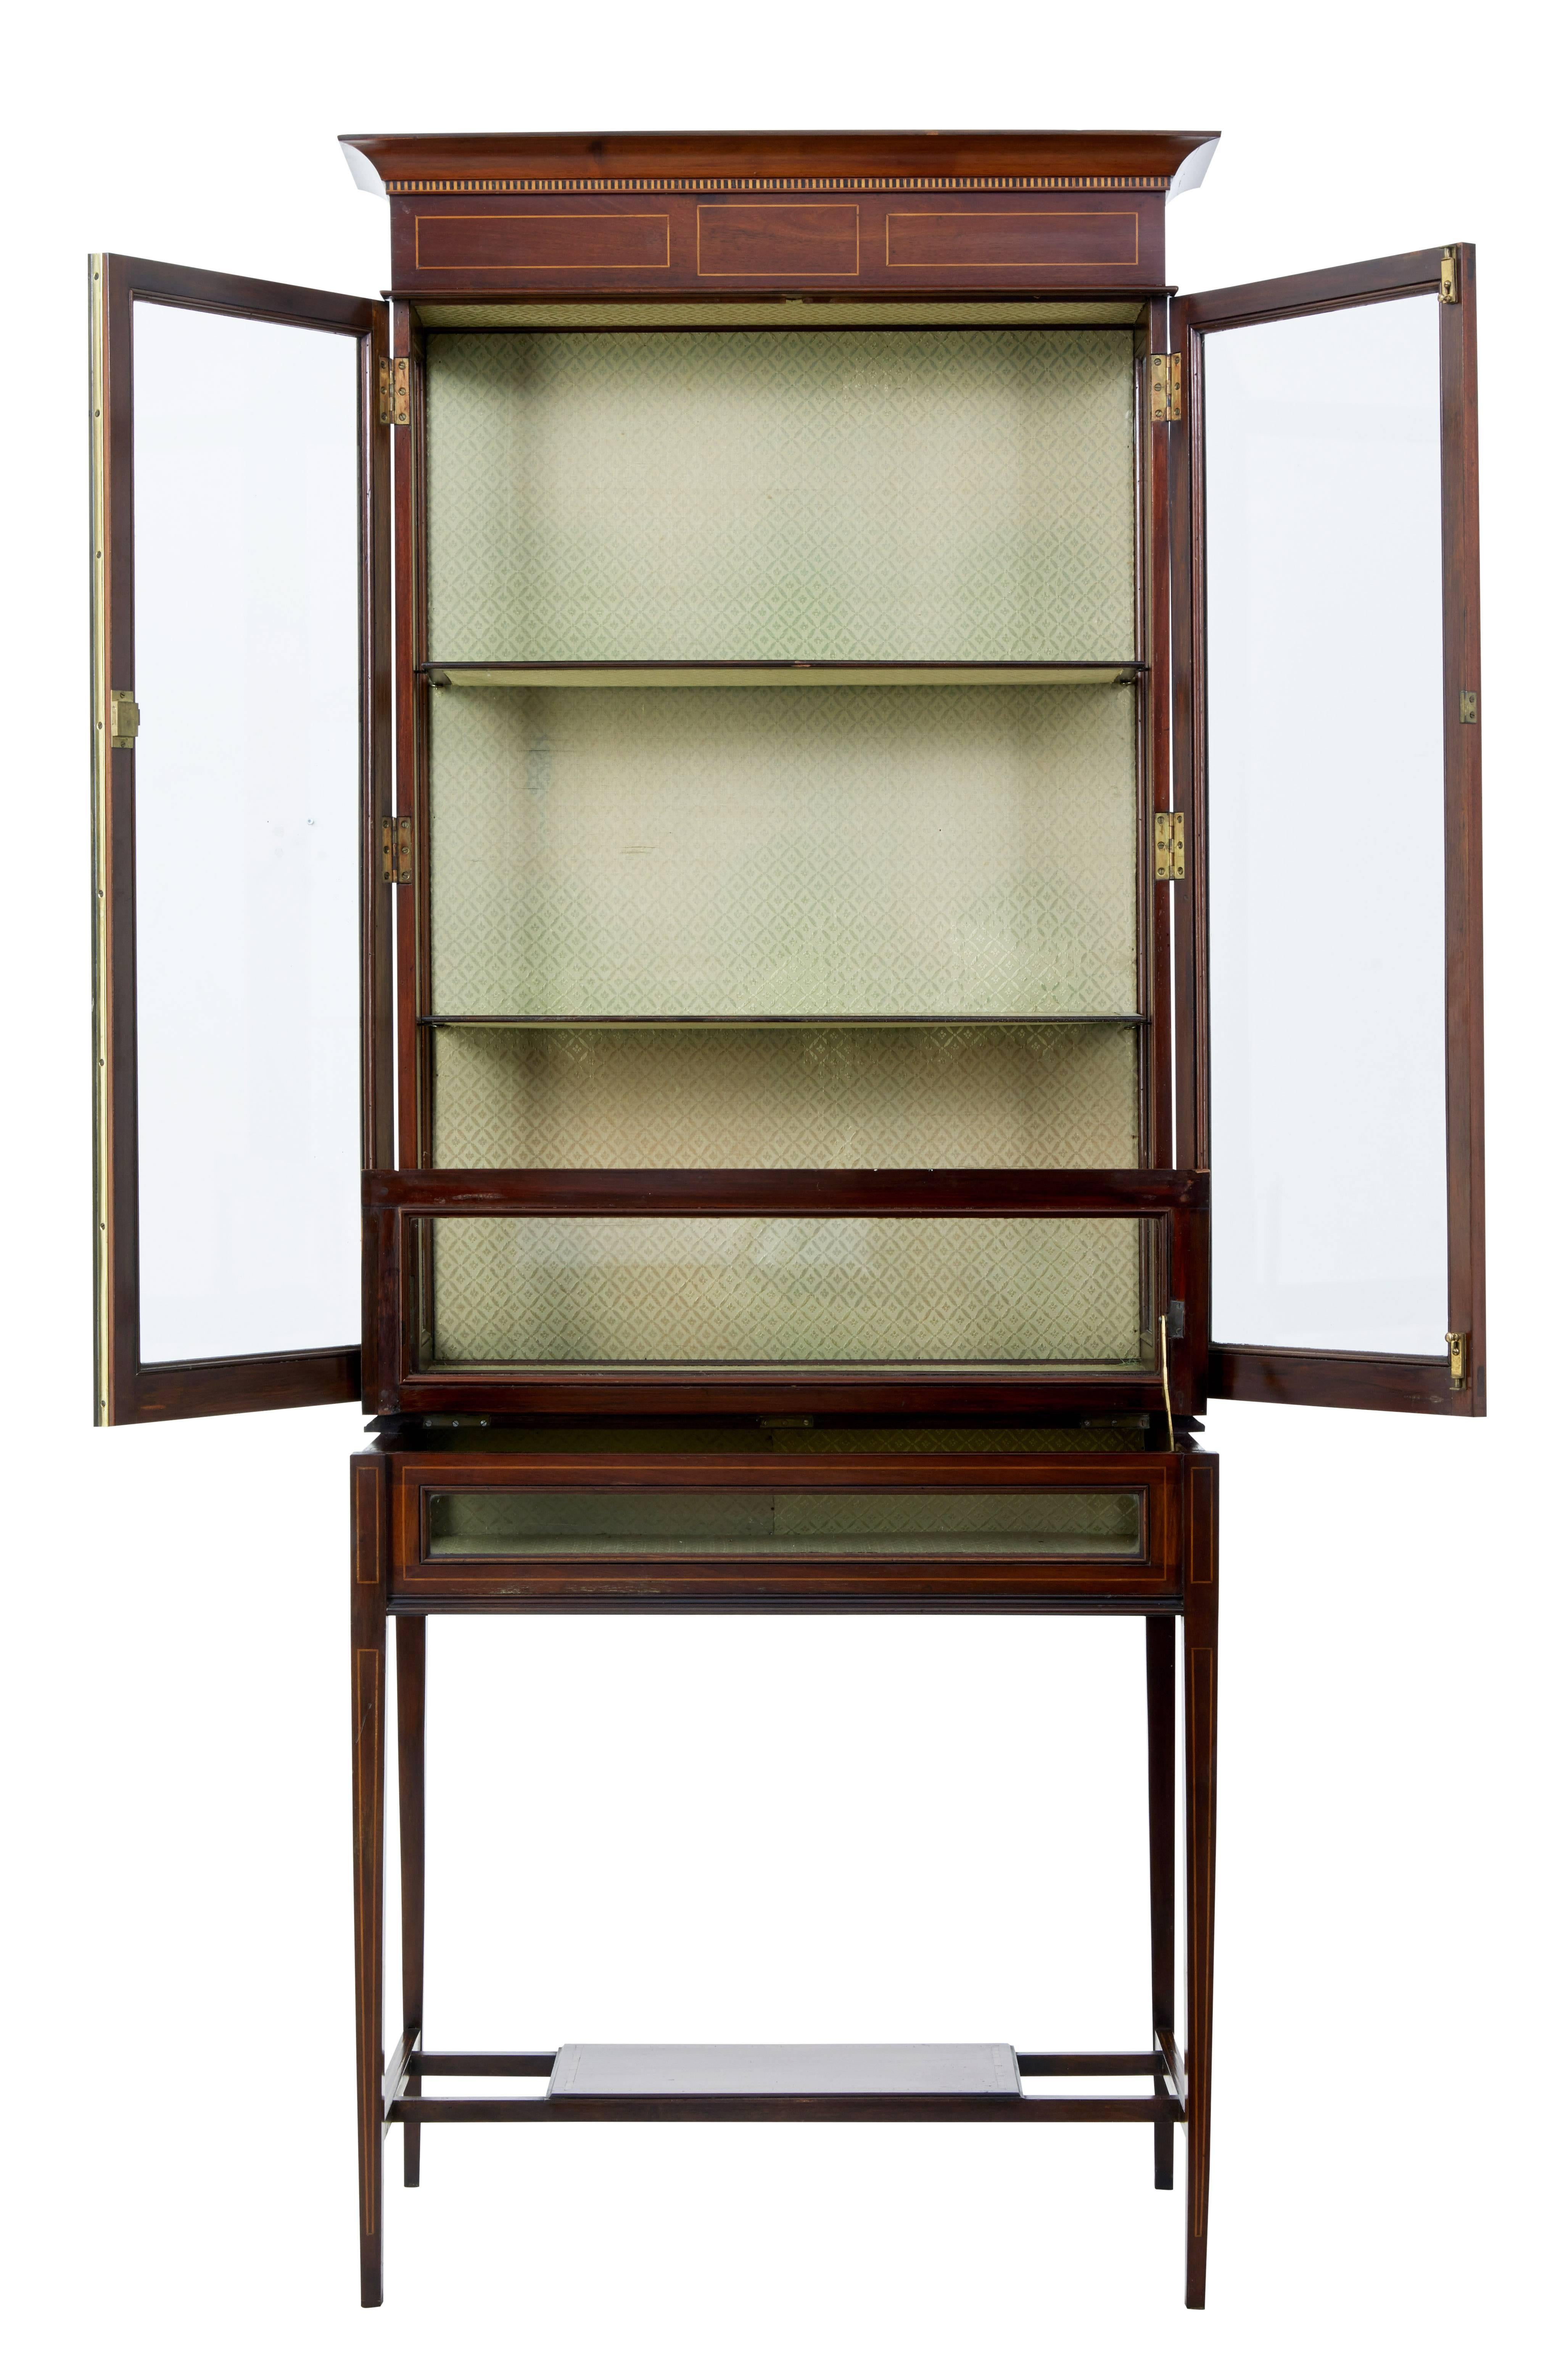 Elegant mahogany display cabinet, circa 1900.

Cross banded and strung in satinwood.

Comprising of two parts, the top section with cornice and dentil frieze detail, double glazed doors open to two fixed position shelves.

Bottom section with